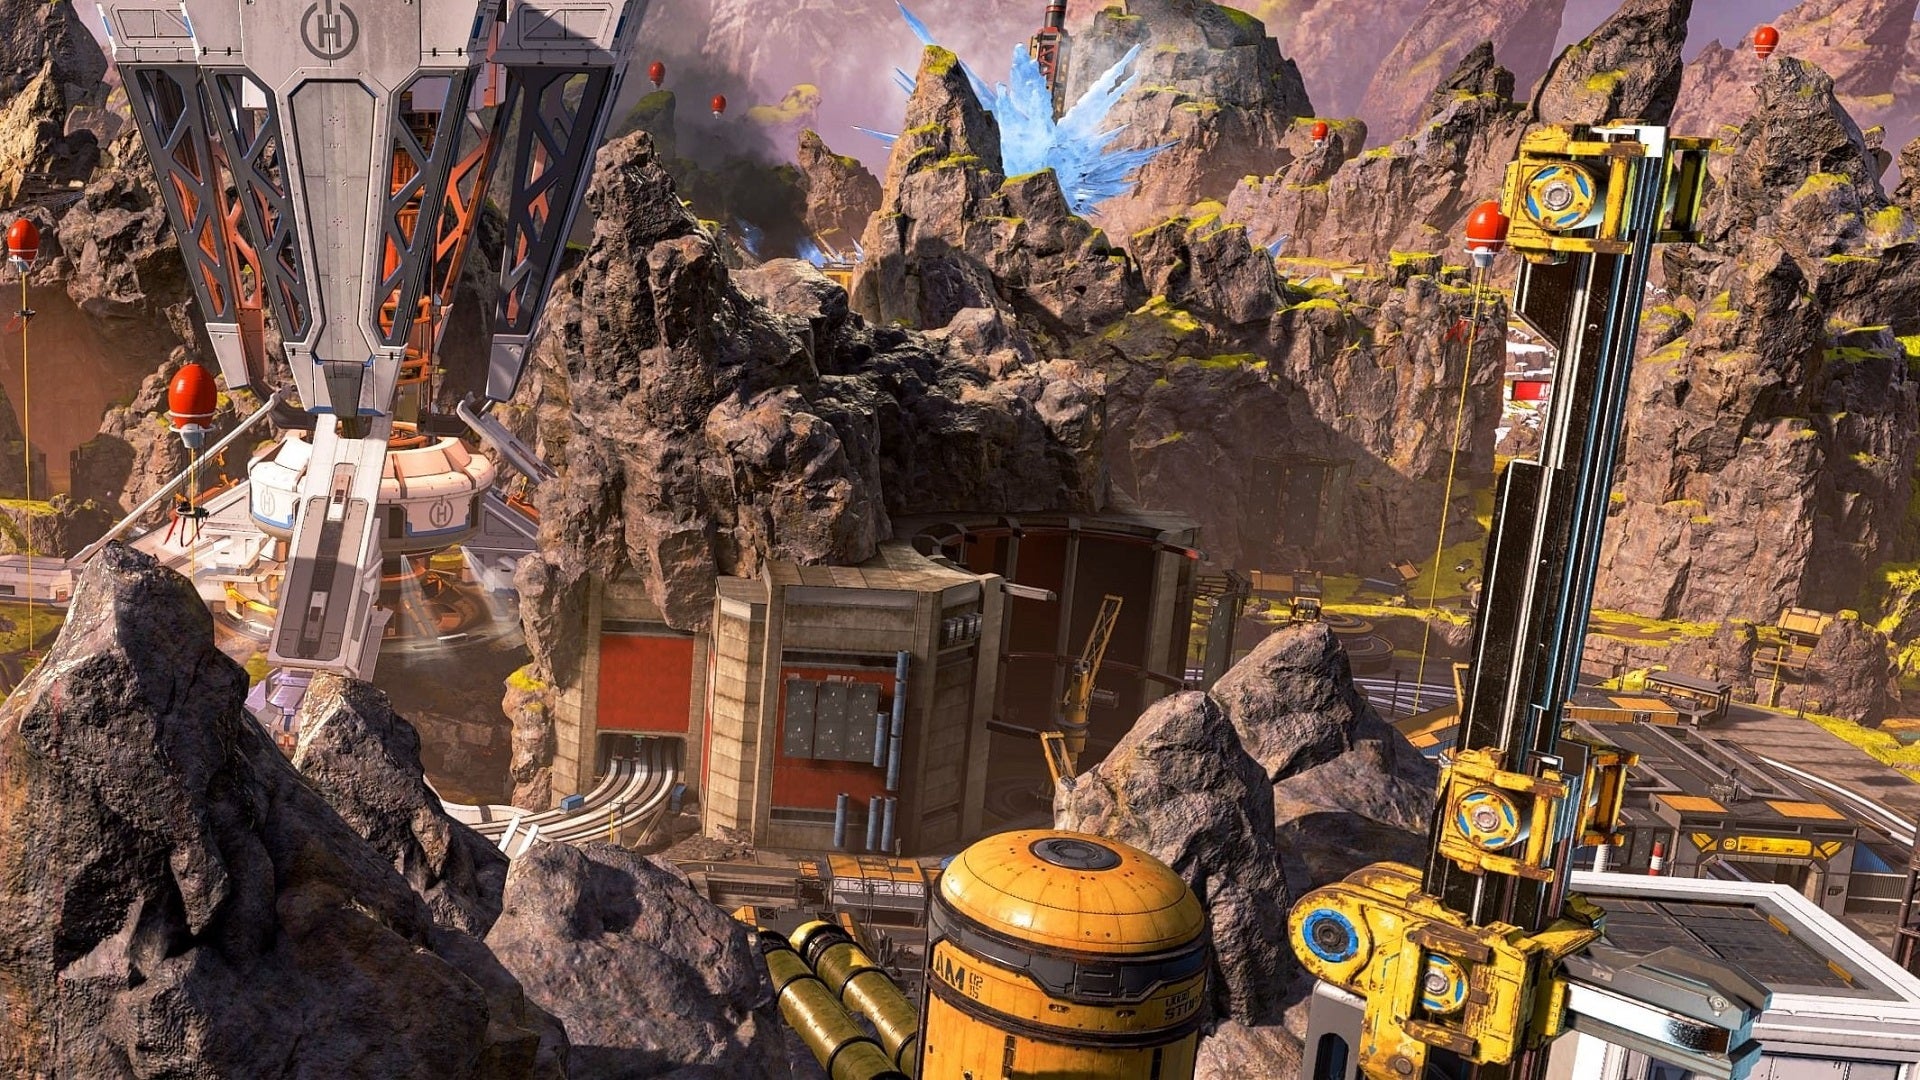 World's Edge is back in Apex Legends, which means we're dropping Fragment